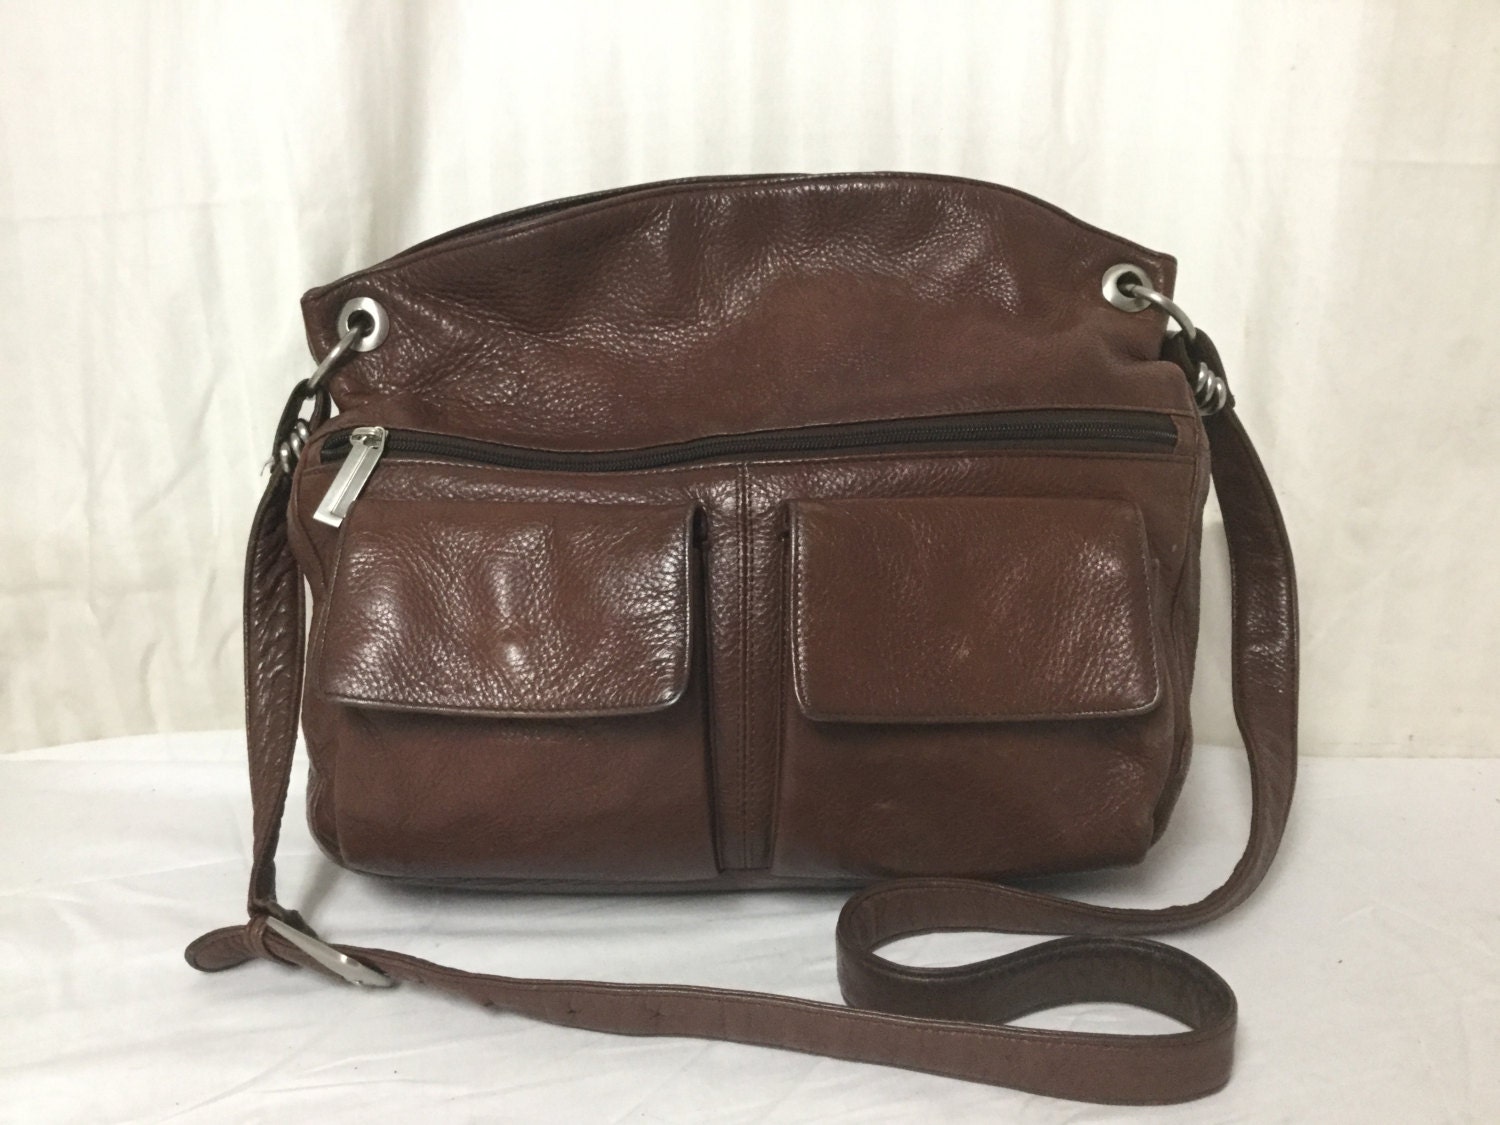 Free Ship Stone Mountain Brown Leather Purse Shoulder Bag